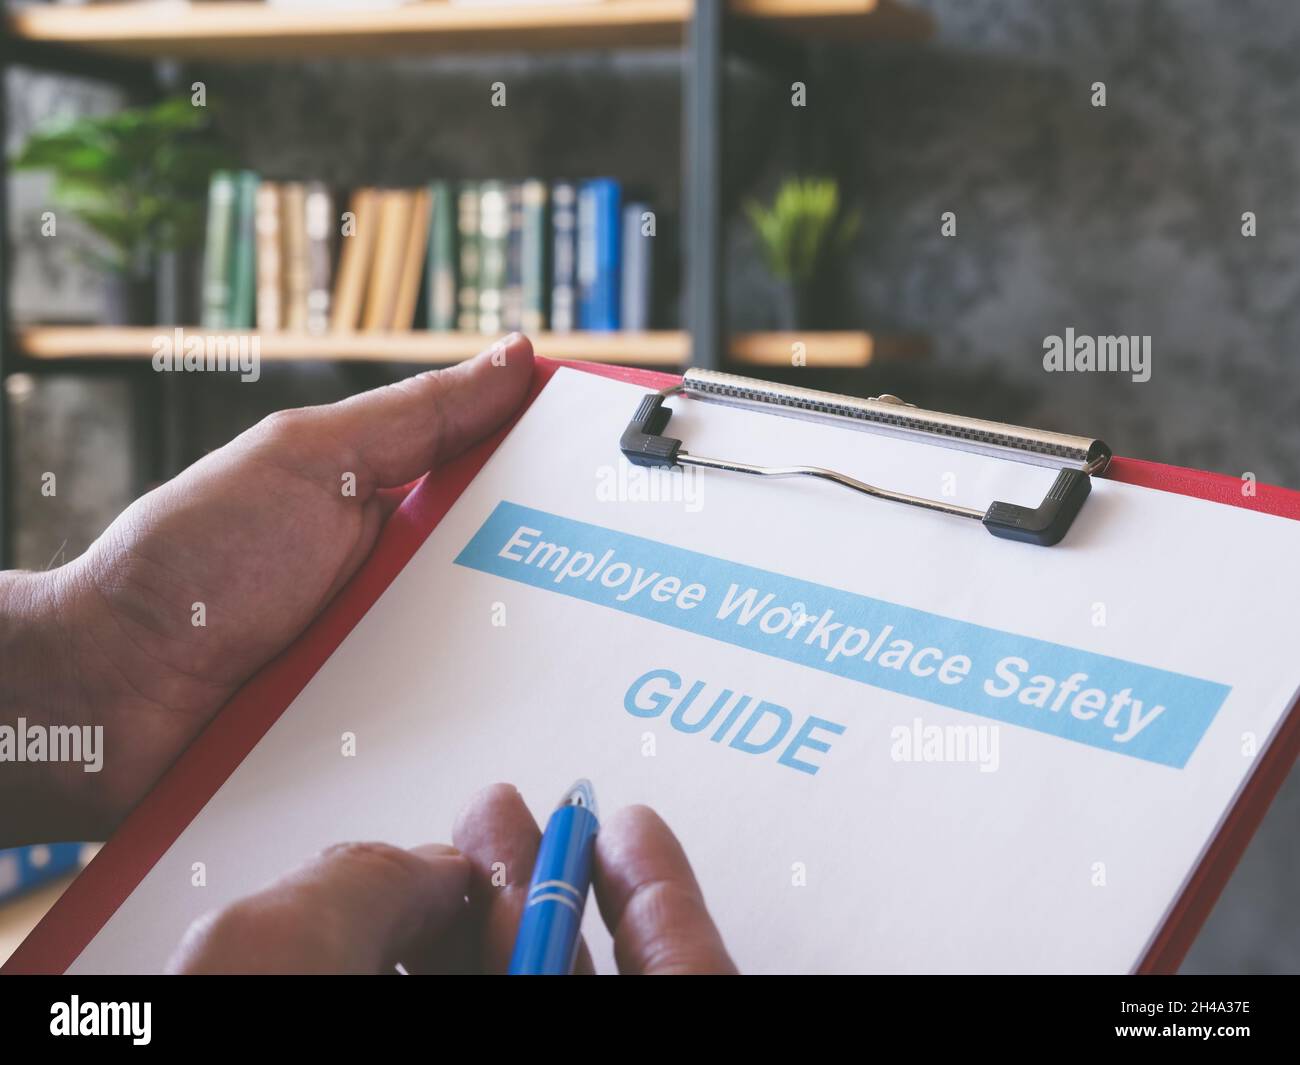 Man reads employee workplace safety guide in the office. Stock Photo